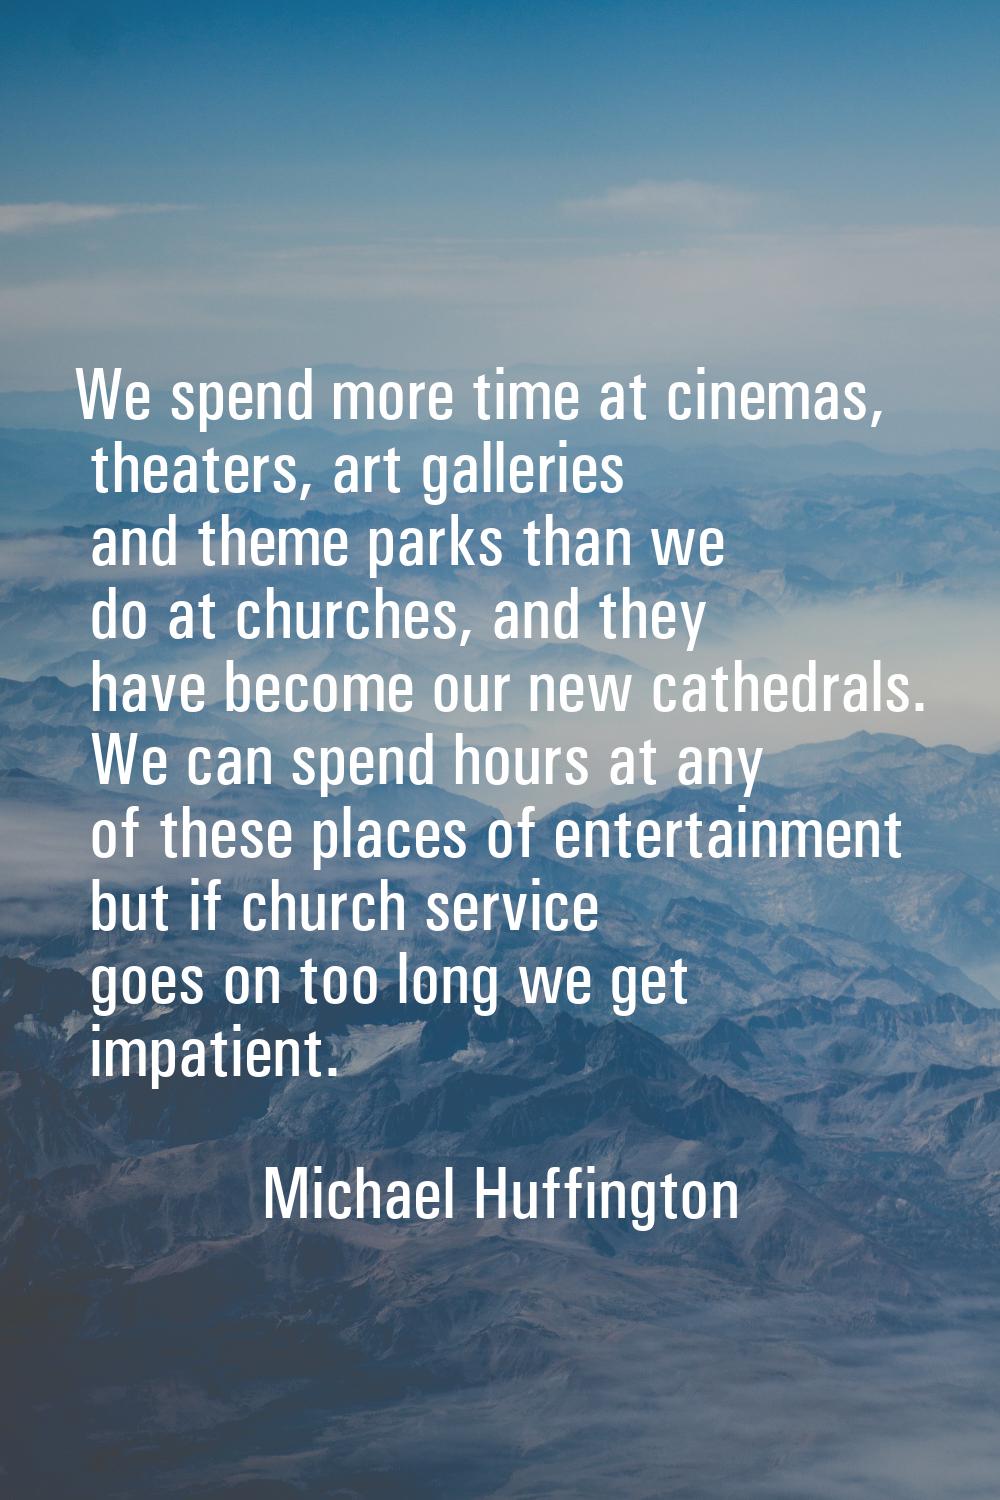 We spend more time at cinemas, theaters, art galleries and theme parks than we do at churches, and 